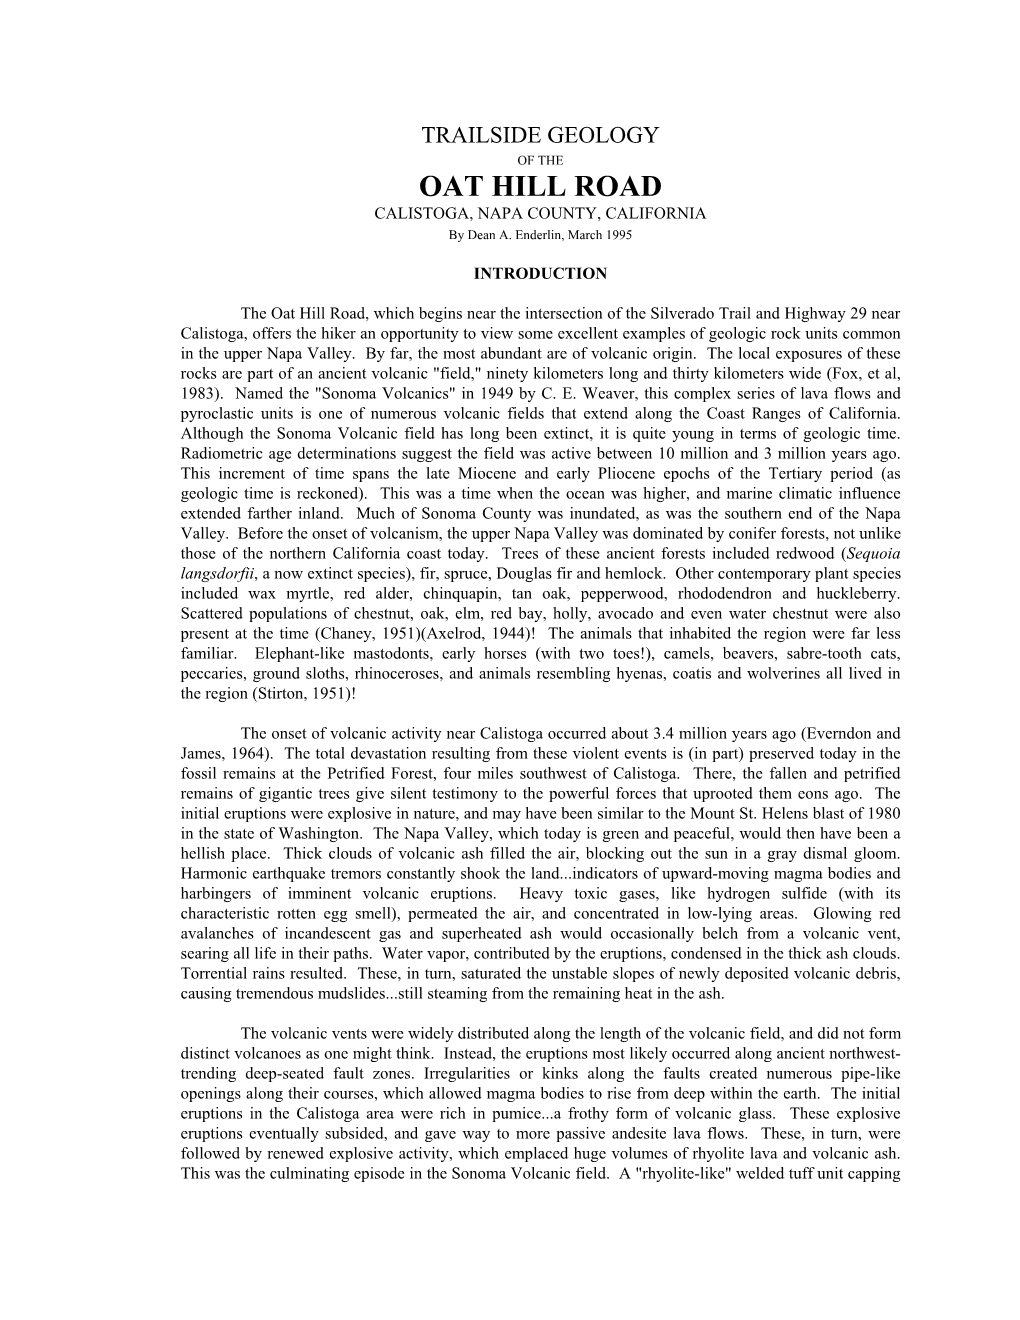 TRAILSIDE GEOLOGY of the OAT HILL ROAD CALISTOGA, NAPA COUNTY, CALIFORNIA by Dean A